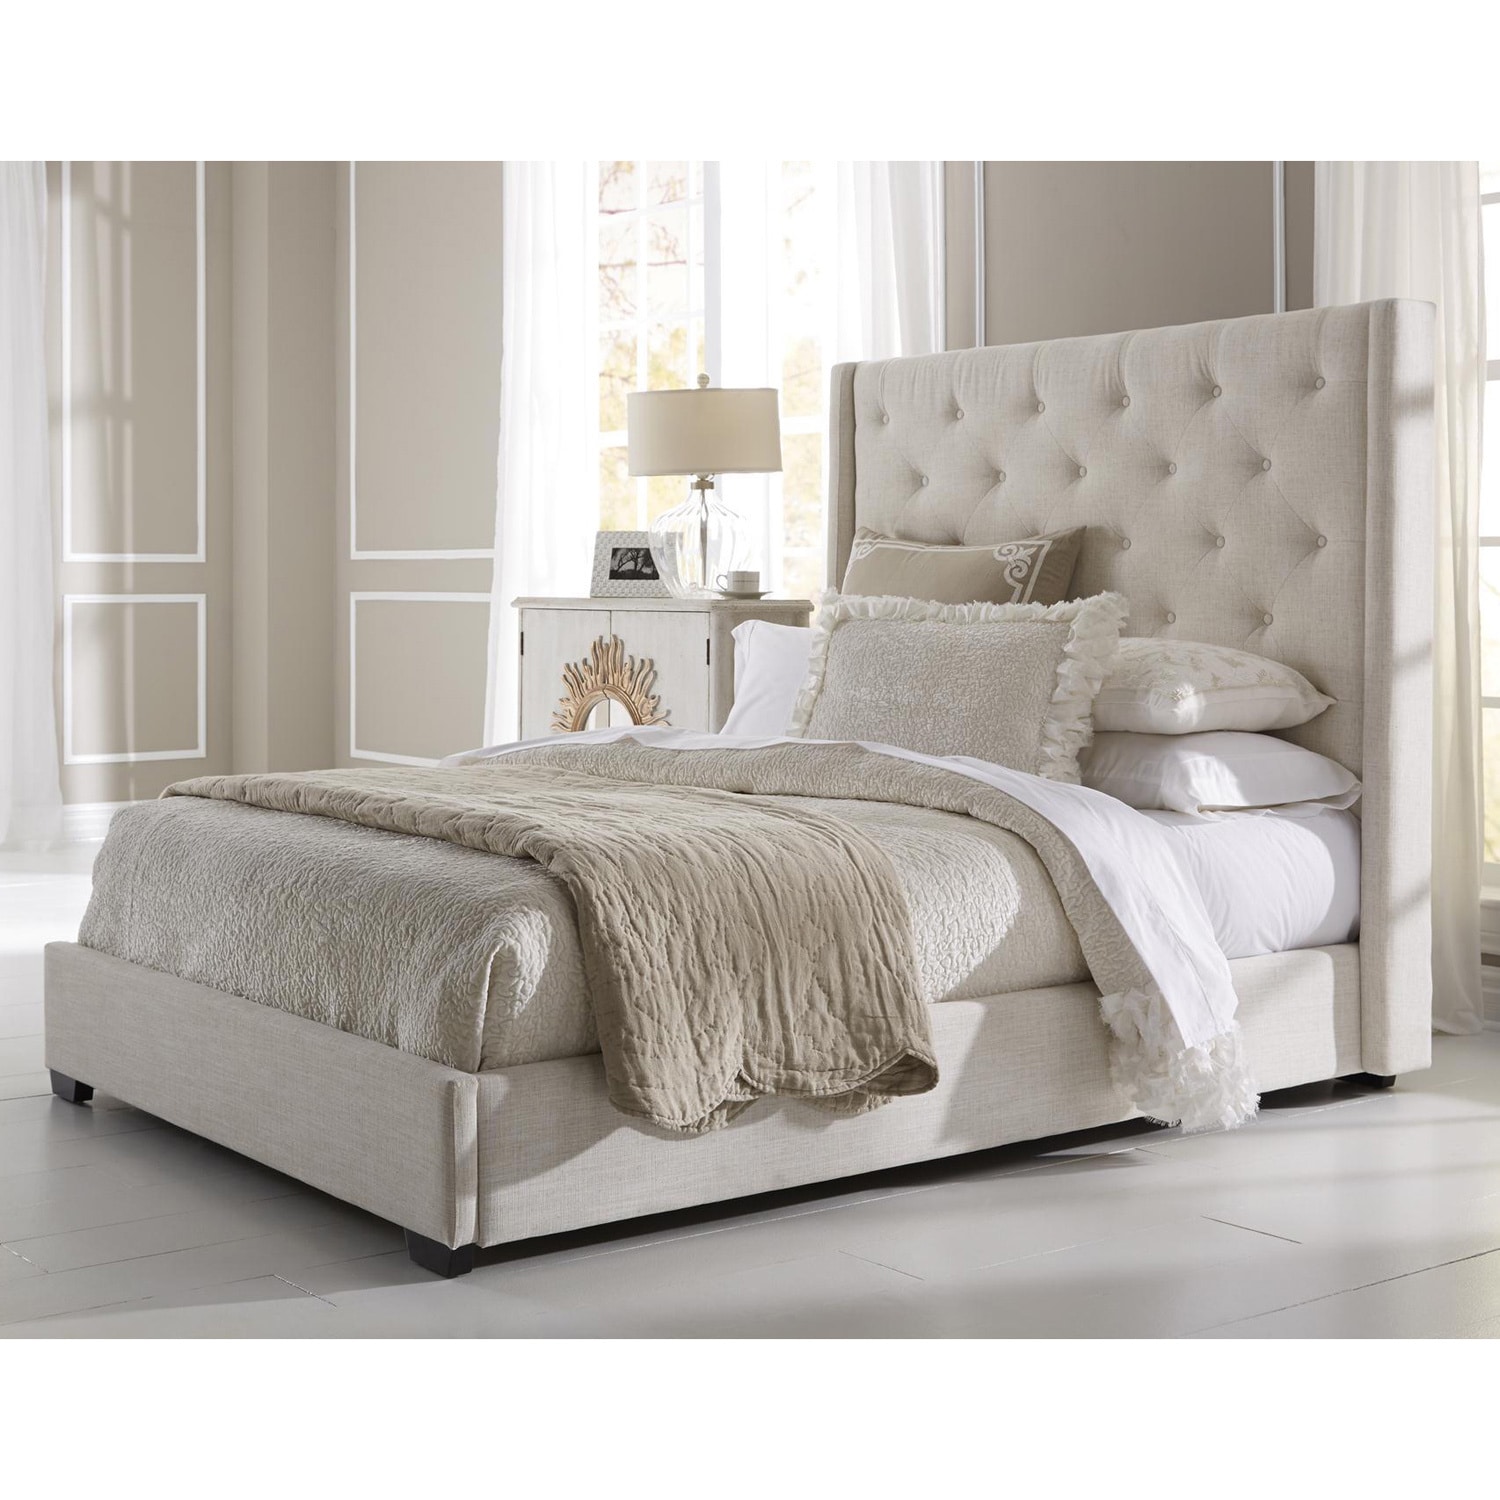 Shop Wingback Button Tufted Cream Upholstered Queen Bed - Free Shipping